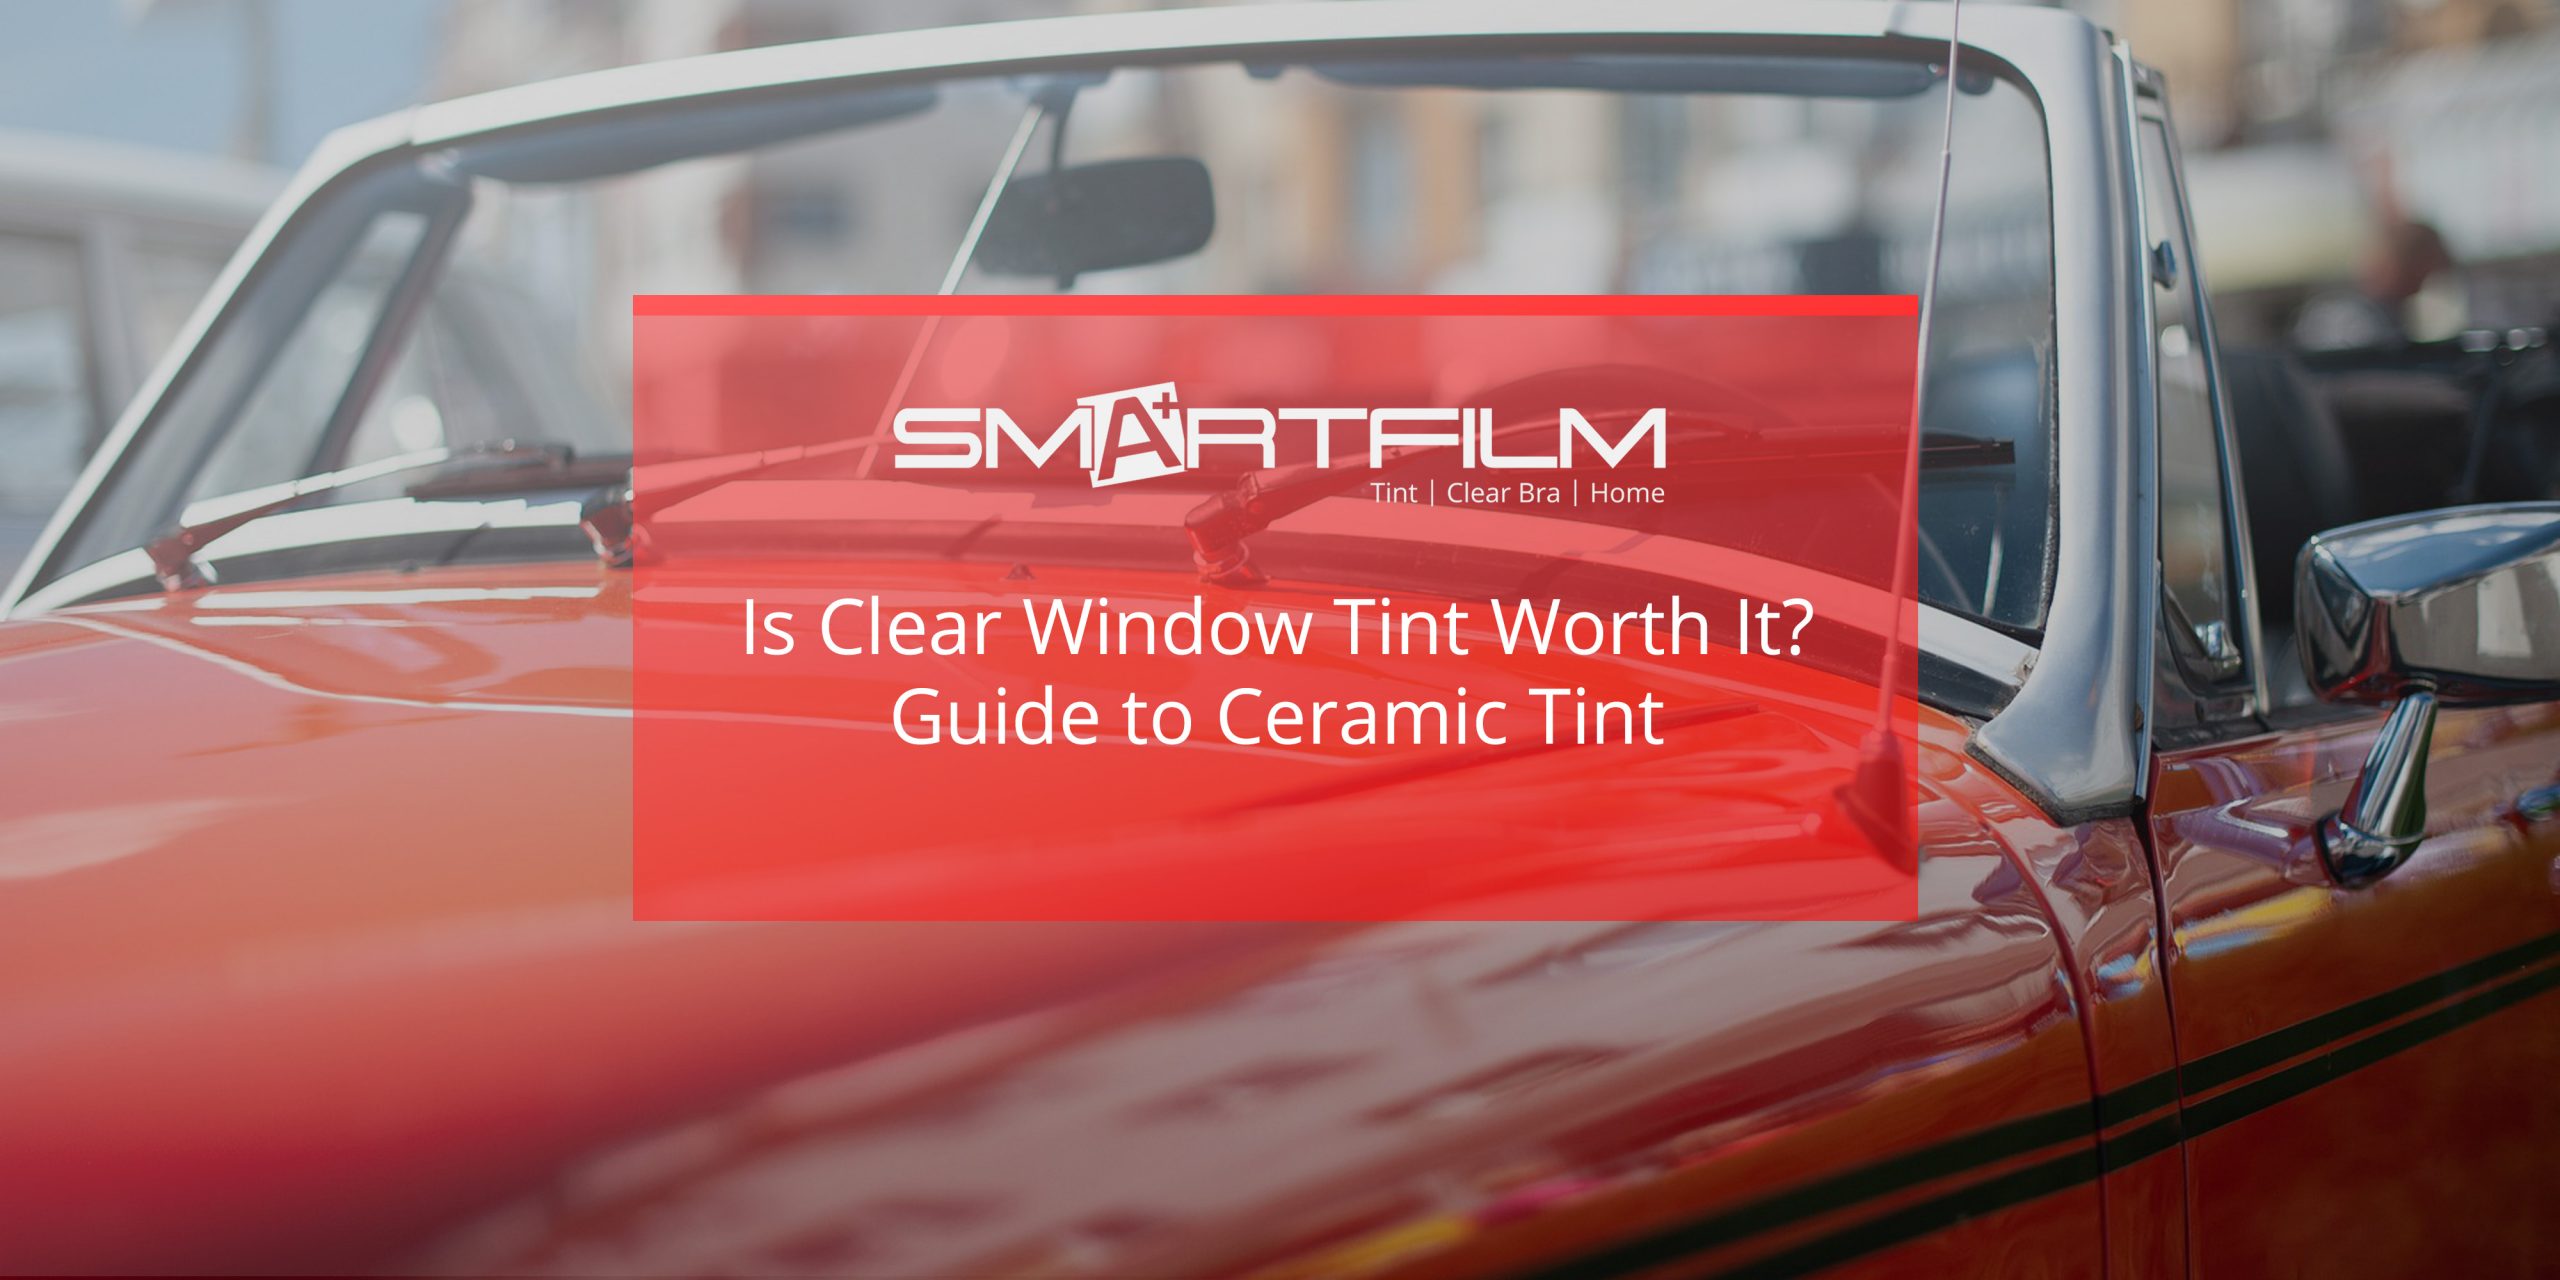 How to remove tint from car windows at home?